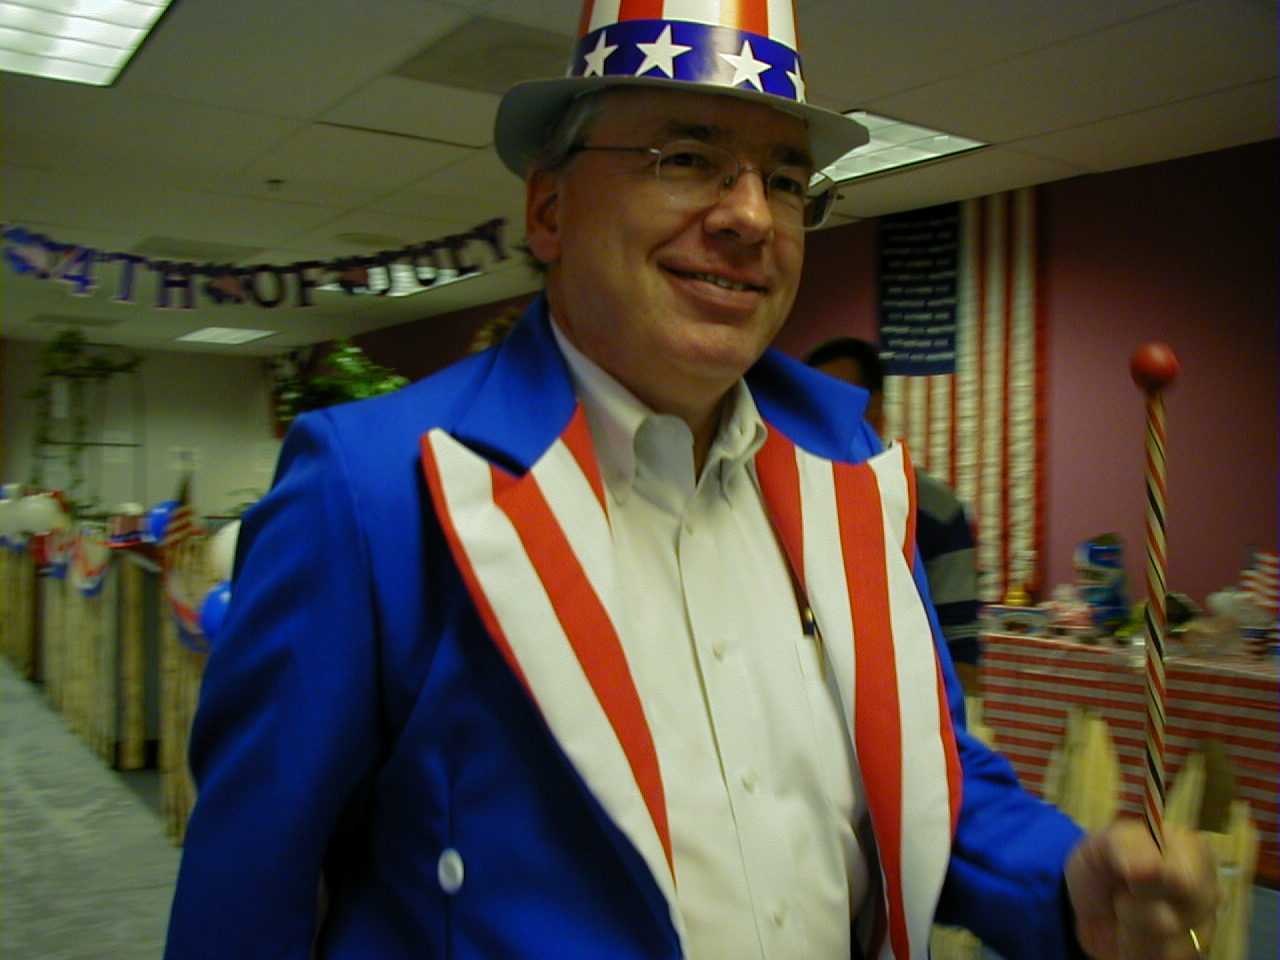 Henry as Uncle Sam